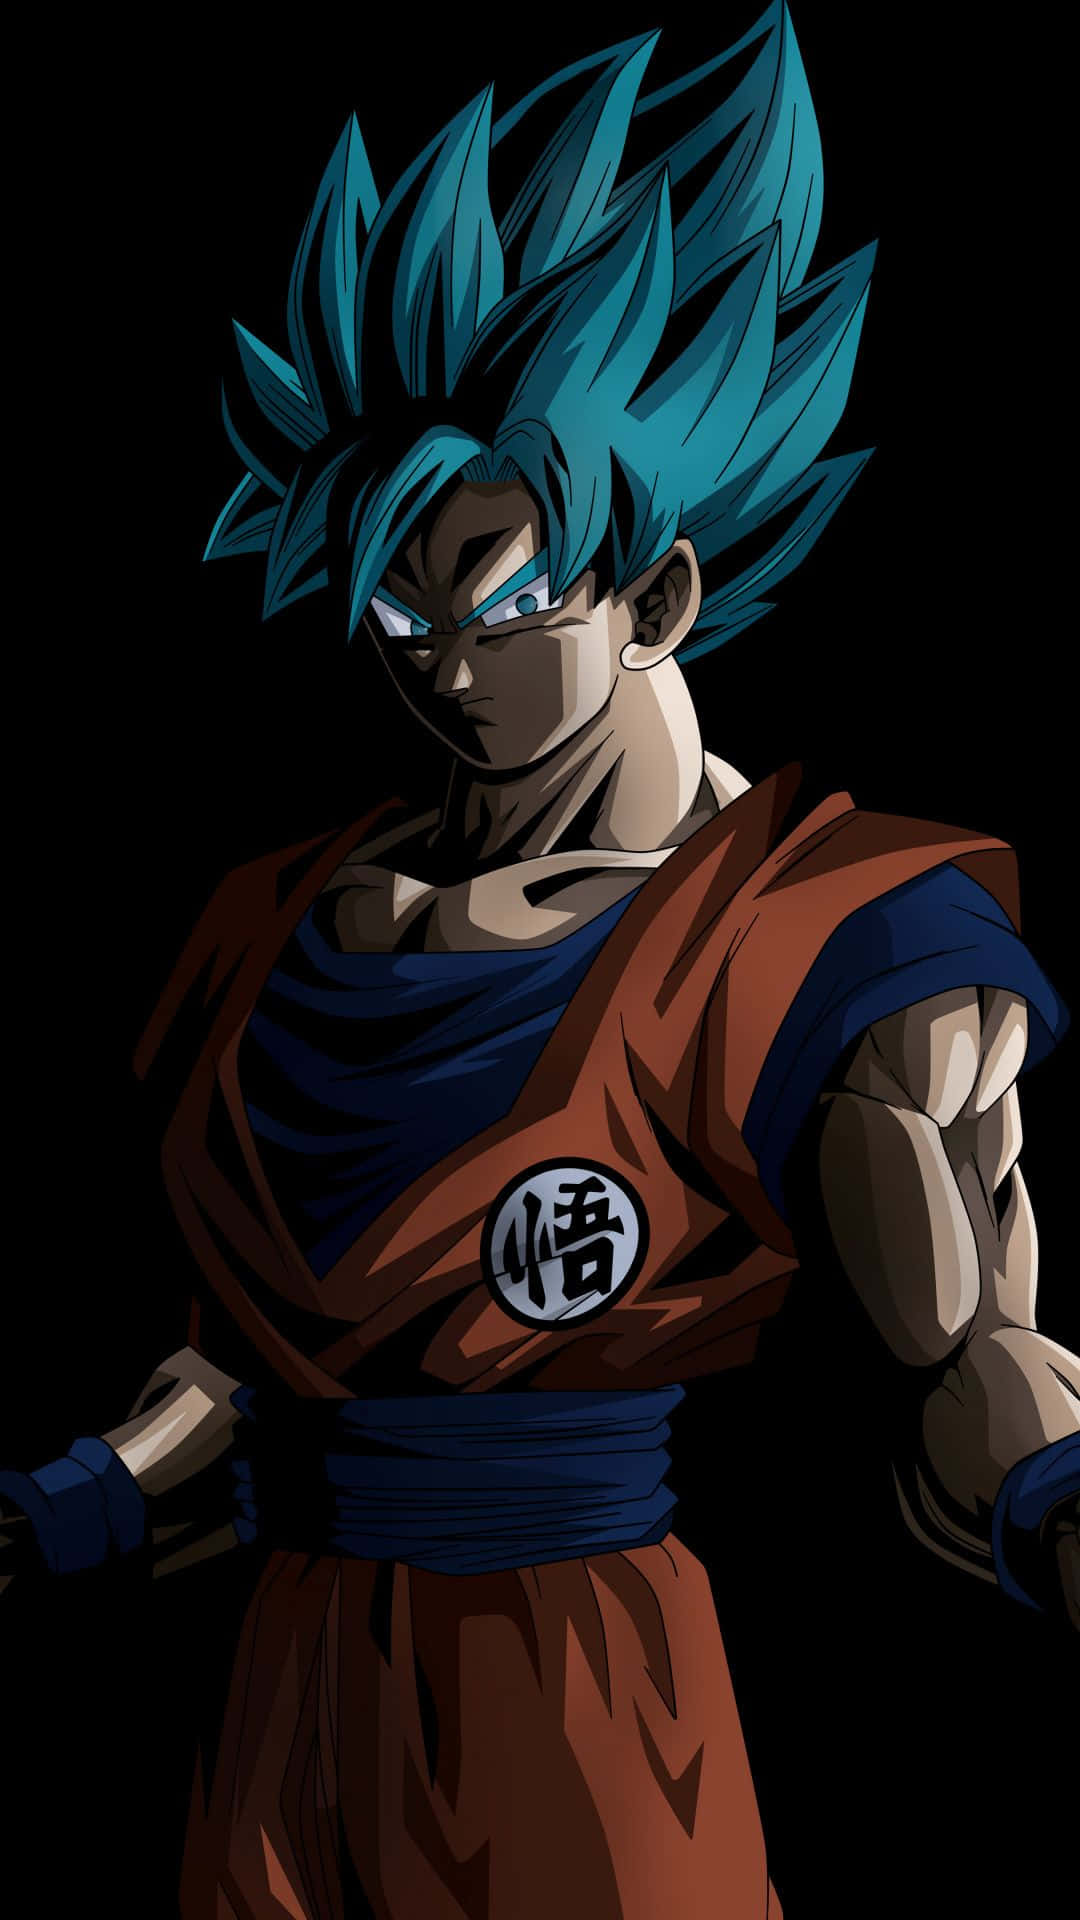 Get The Latest Anime Action With Dragon Ball Super Iphone Wallpaper